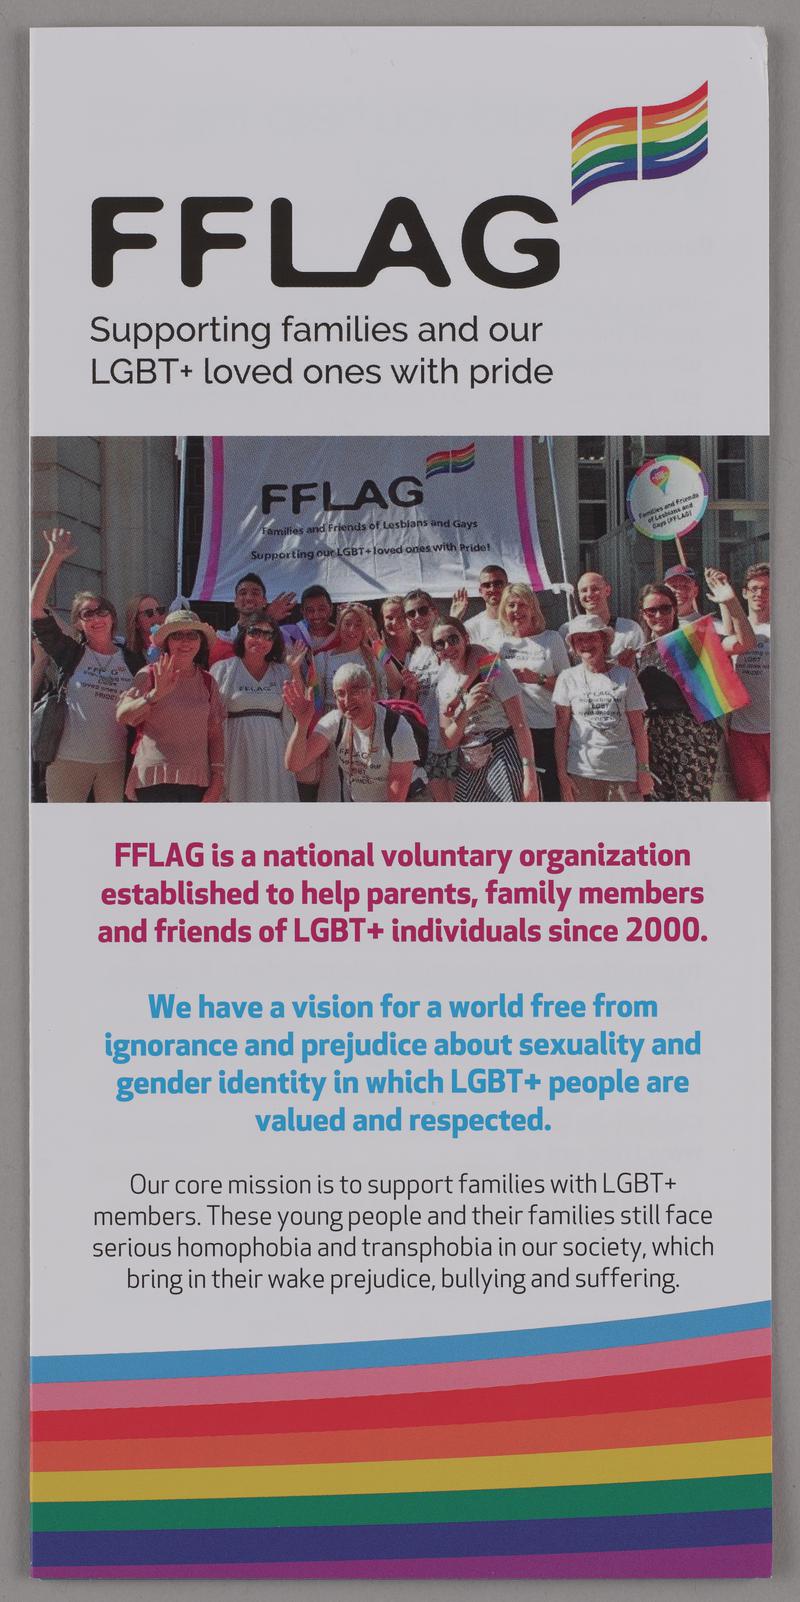 FFLAG leaflet &#039;FFLAG Supporting families and our LGBT+ loved ones with pride&#039;.